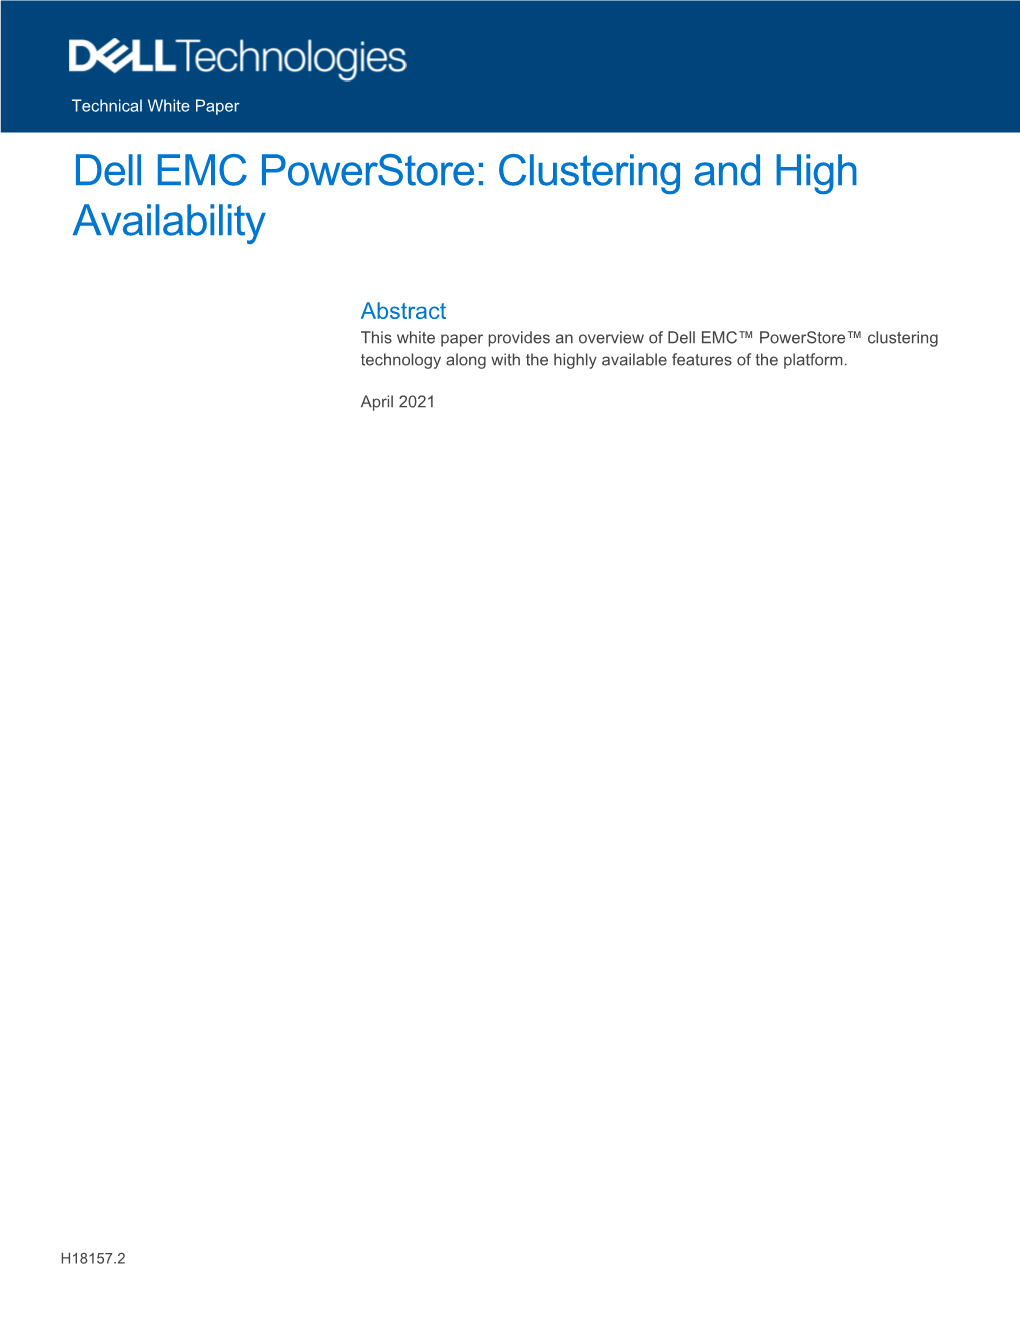 Dell EMC Powerstore: Clustering and High Availability